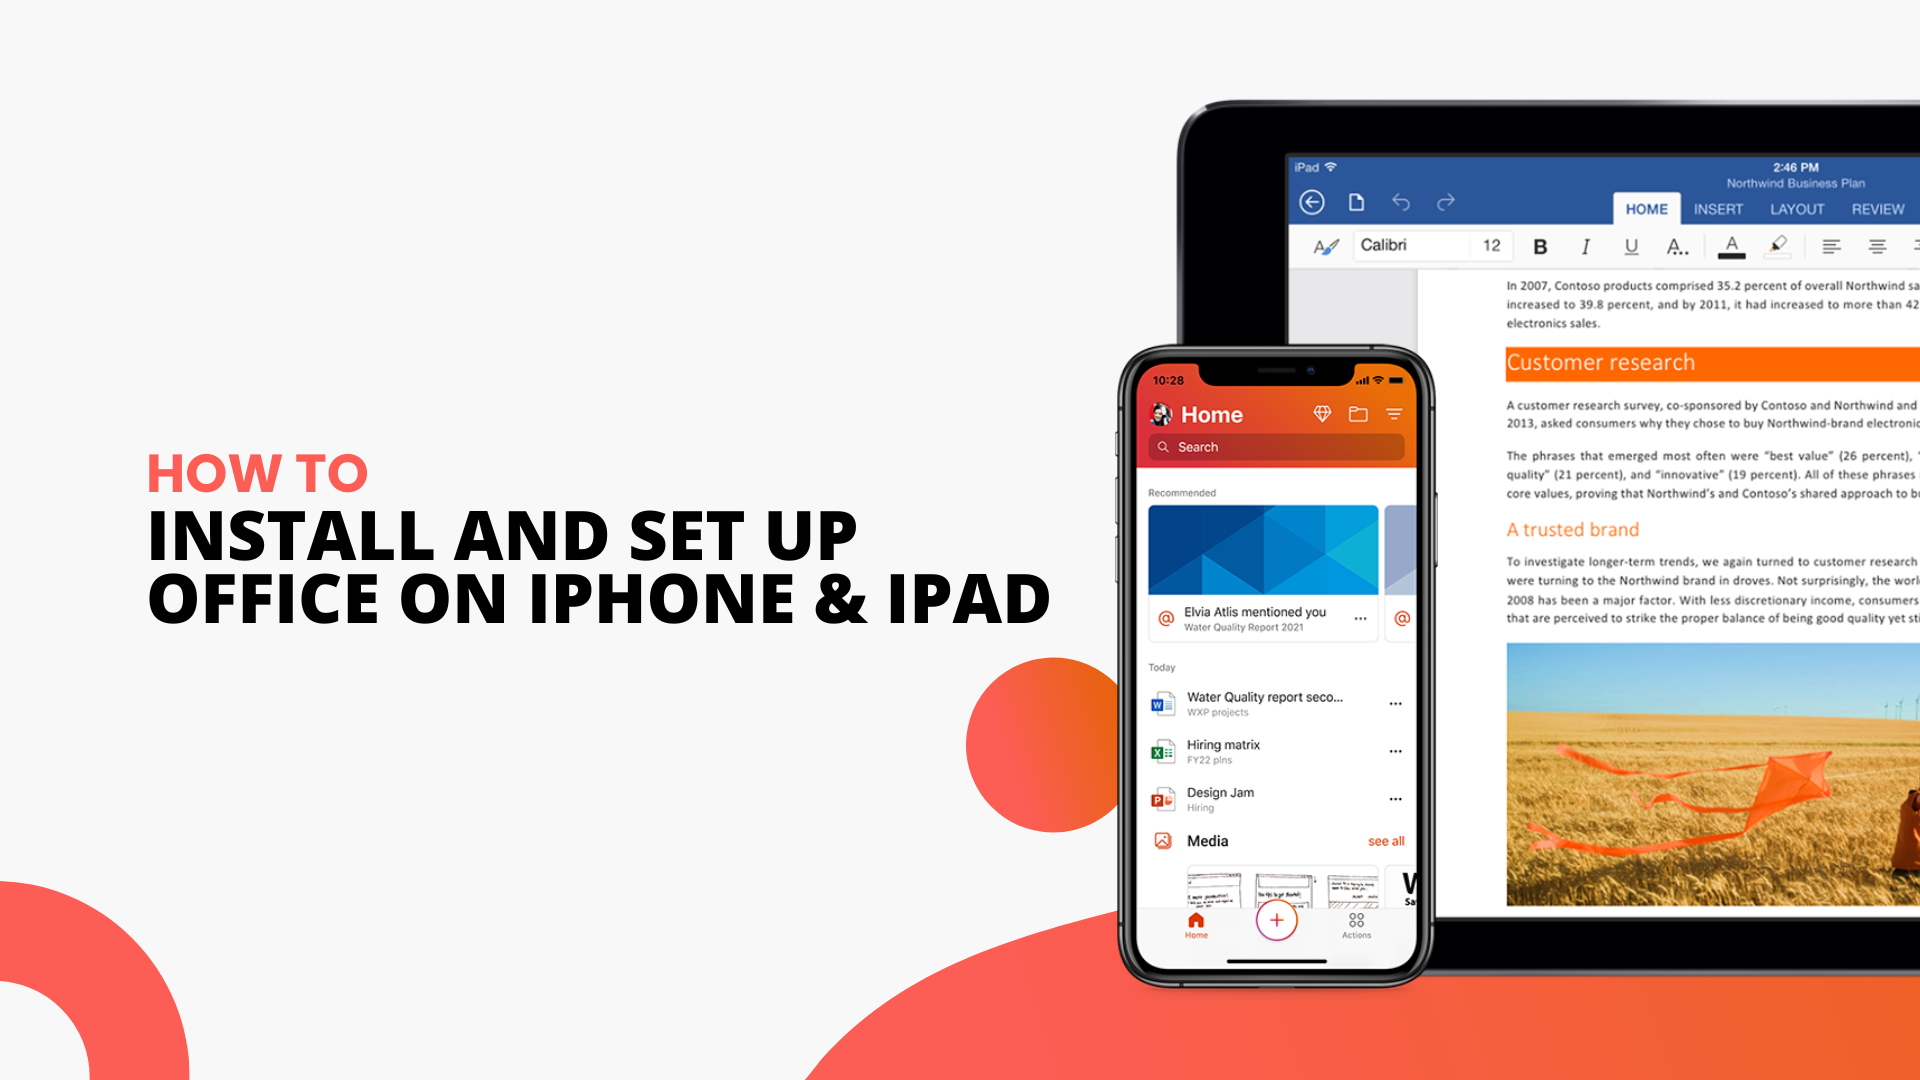 How to Install and Set up Office on an iPhone or iPad